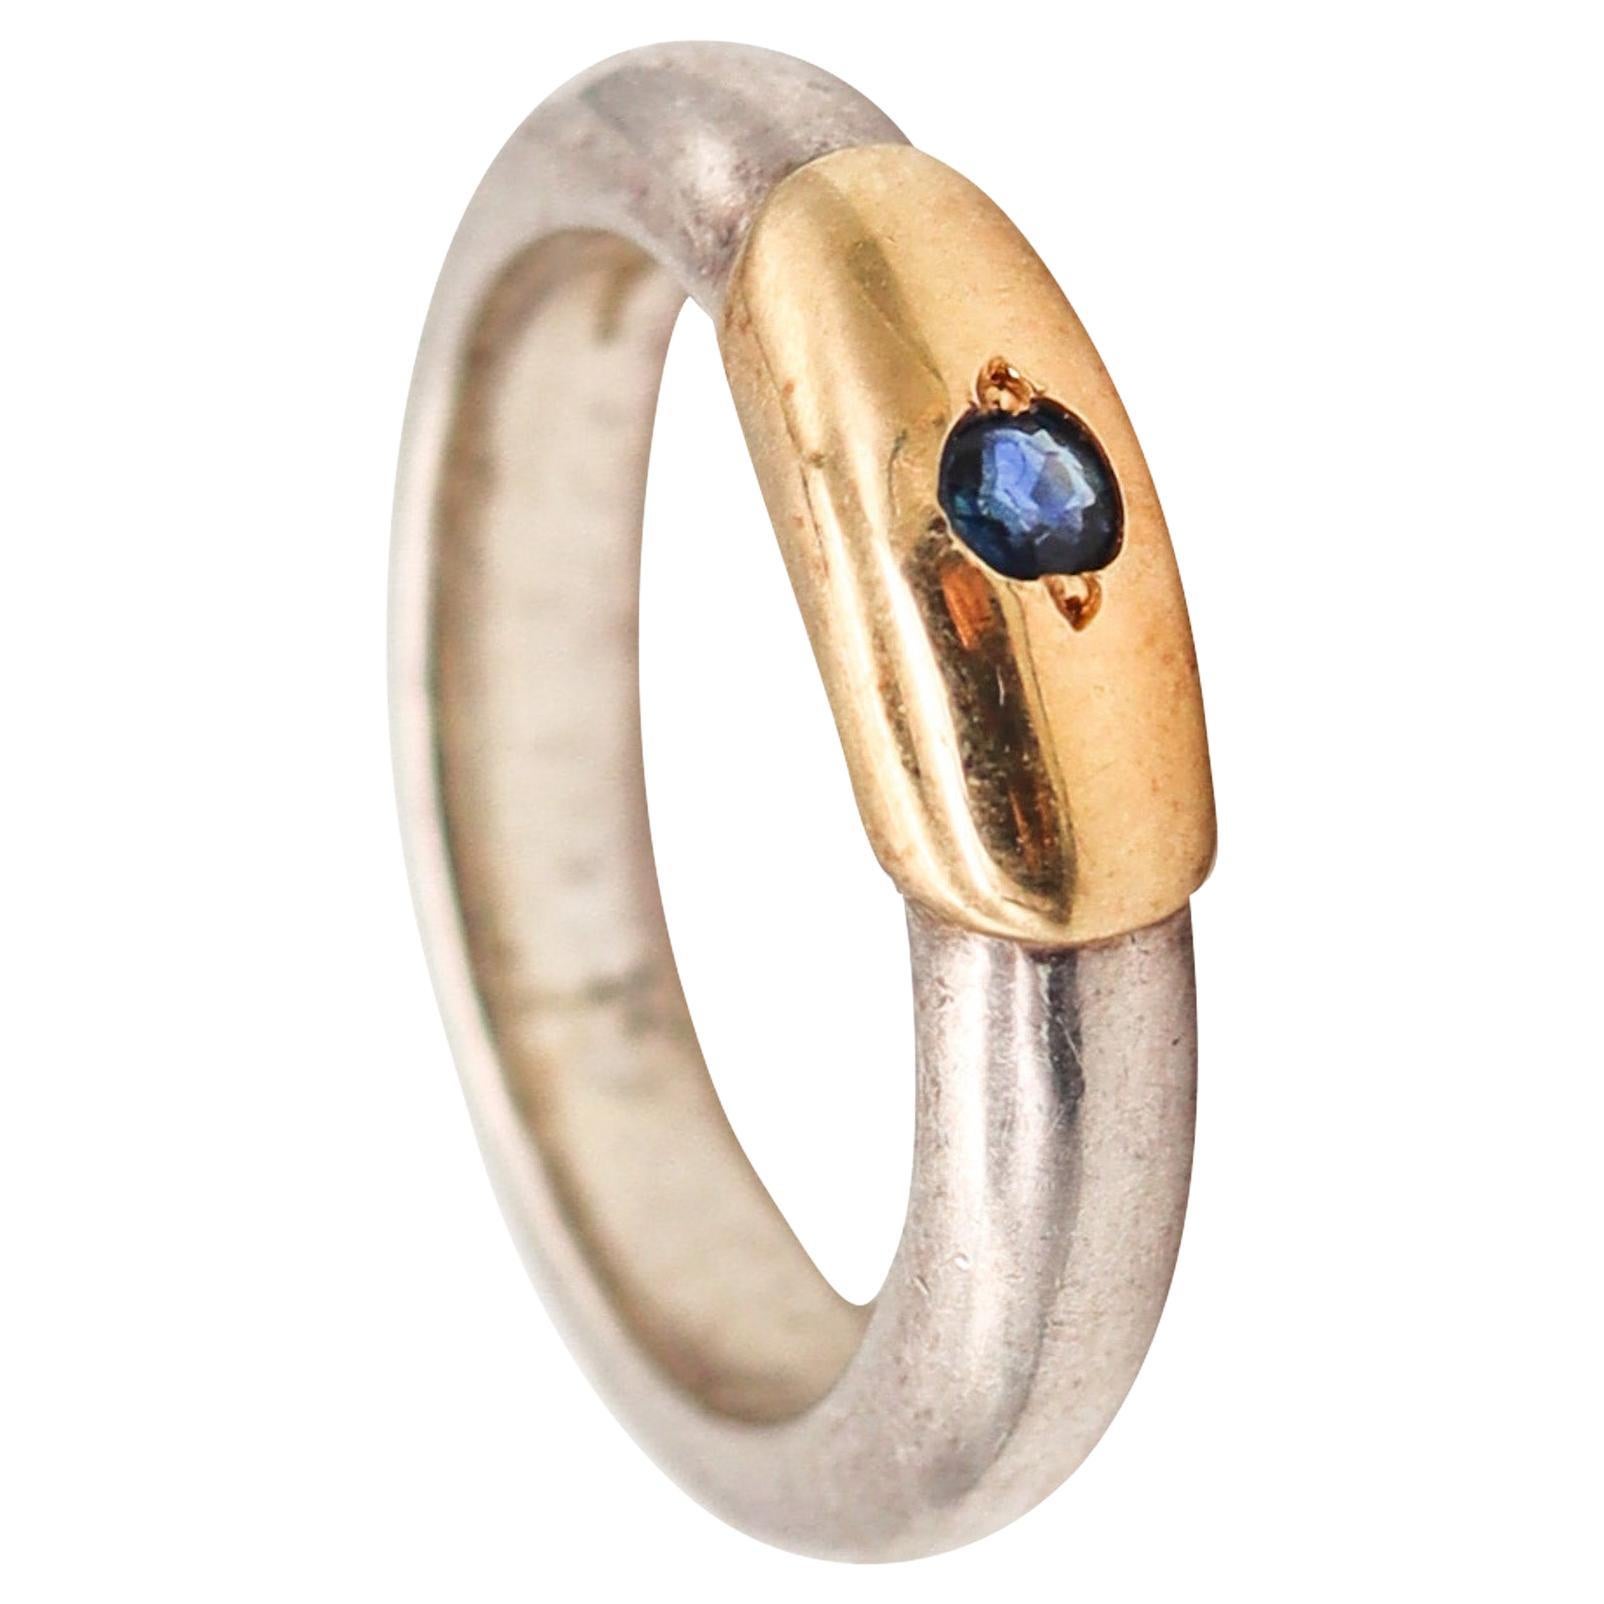 Lalaounis 1970 Greece Band Ring in 18kt Yellow Gold & Sterling with Sapphire